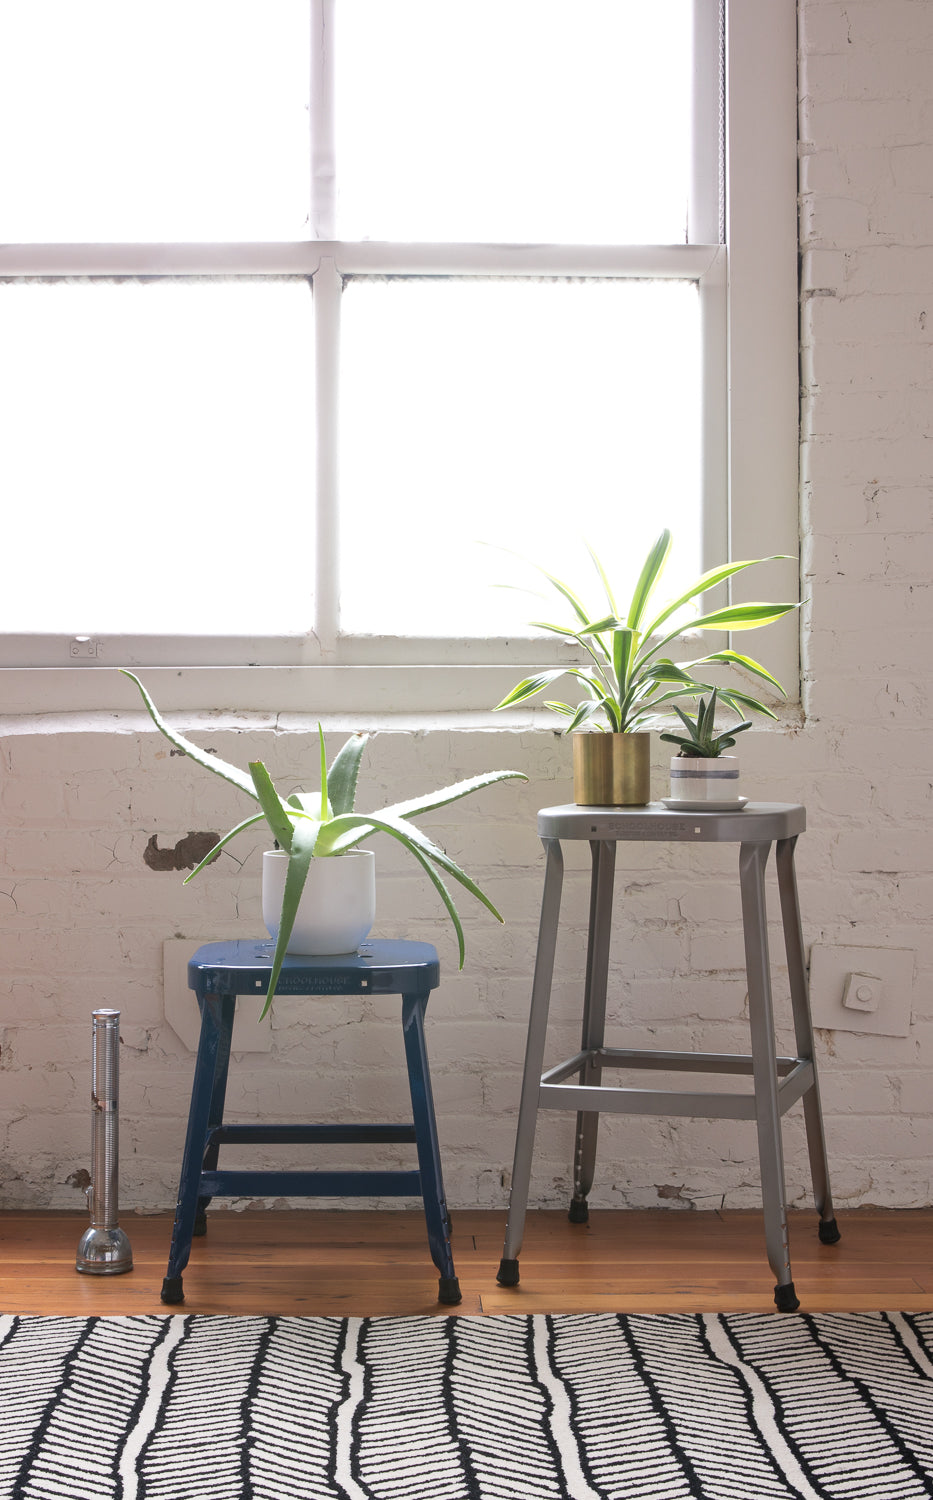 couple of potted plants on stools next to a window